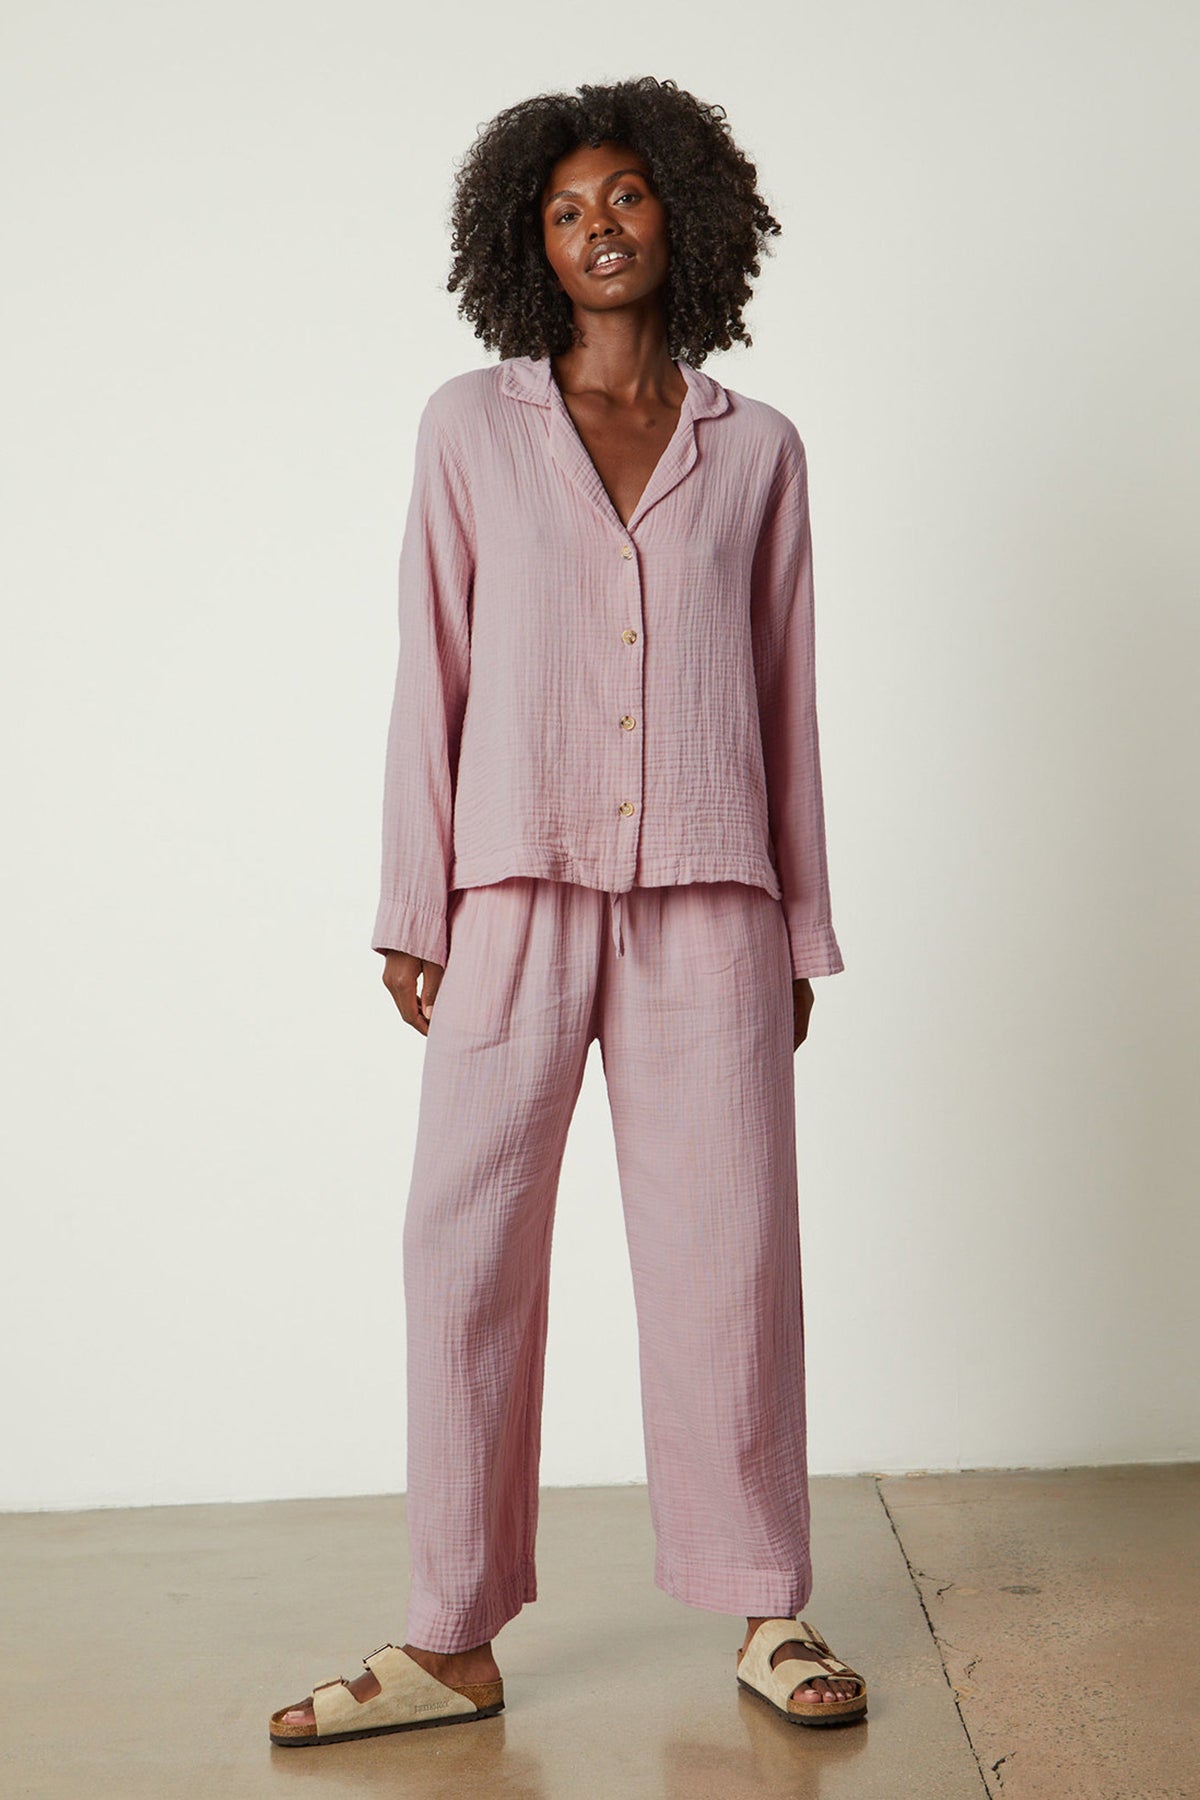   The model is wearing a pink Jenny Graham Home pajama shirt set. 